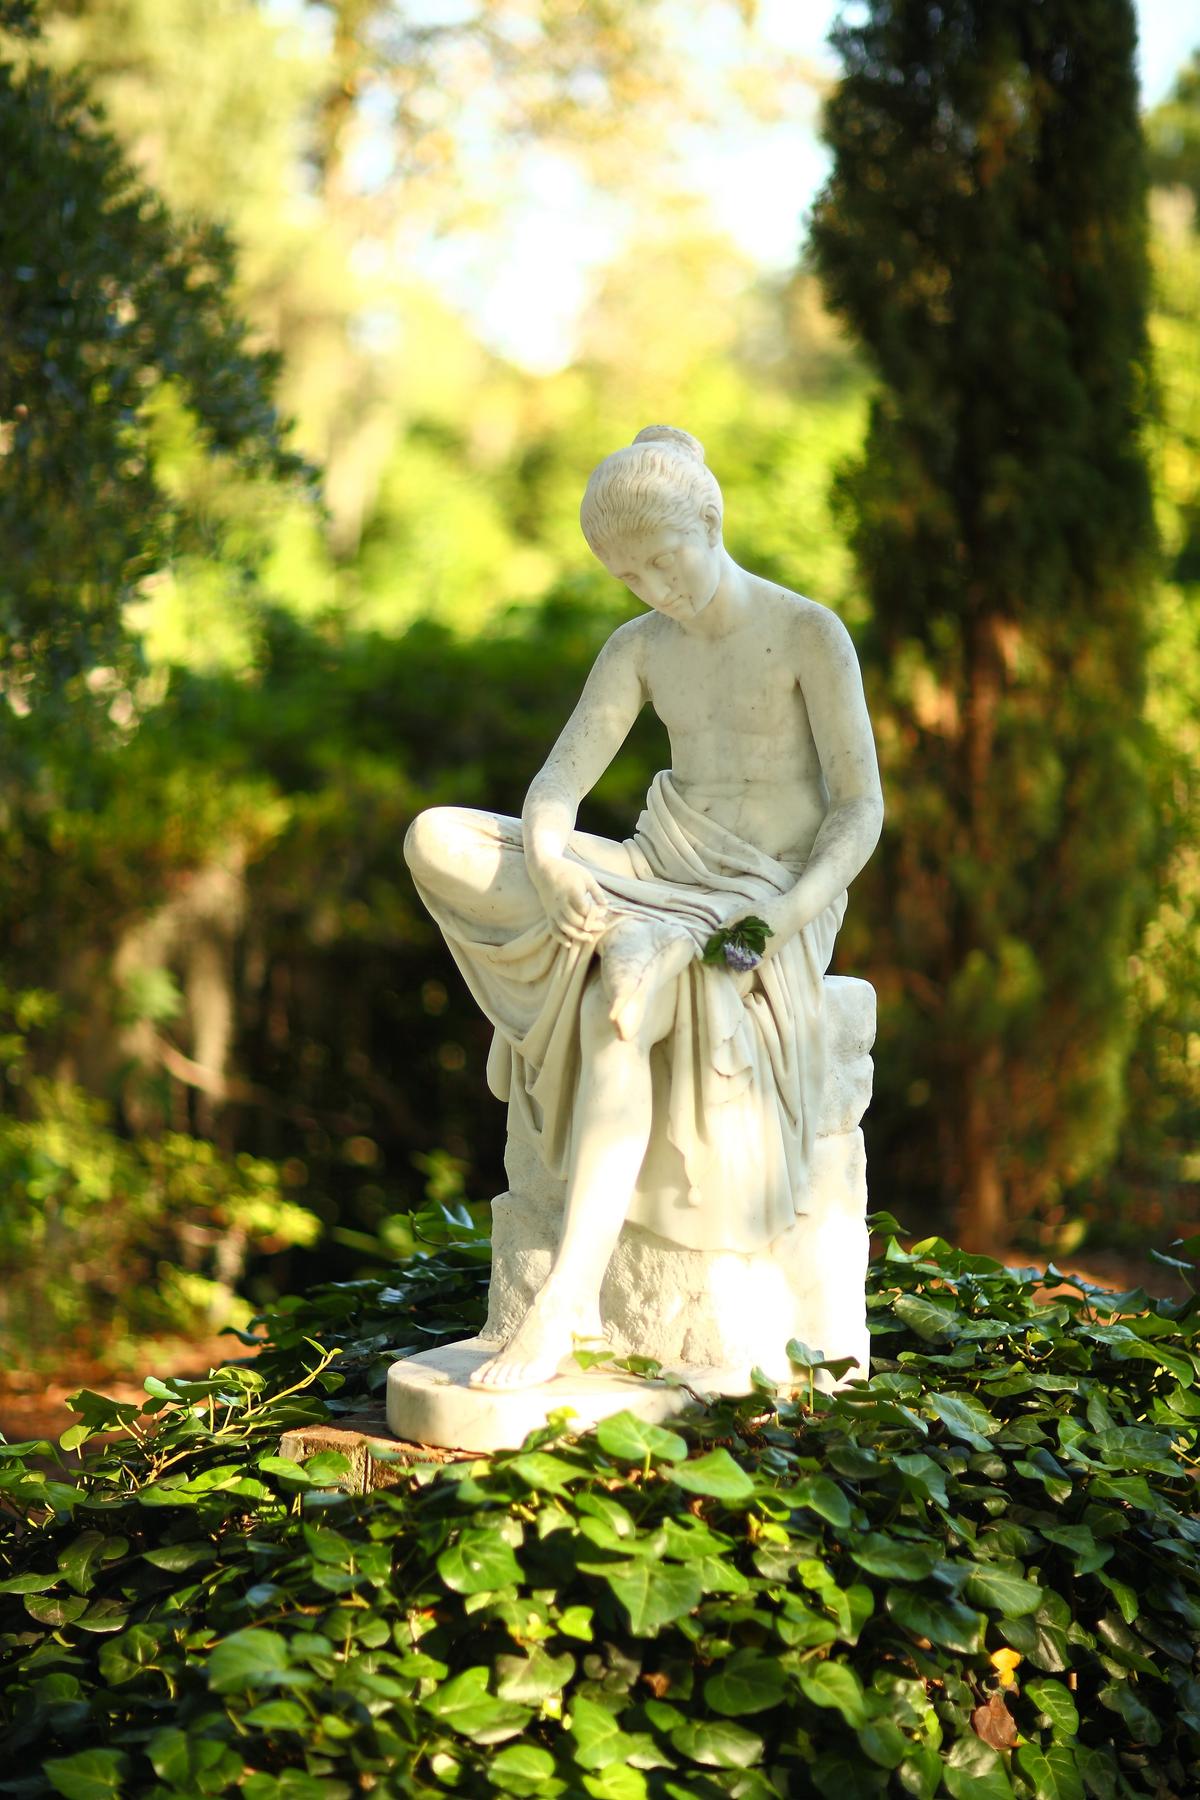 A statue of a wood nymph among the gardens of Middleton Place. (Courtesy of Middleton Place)